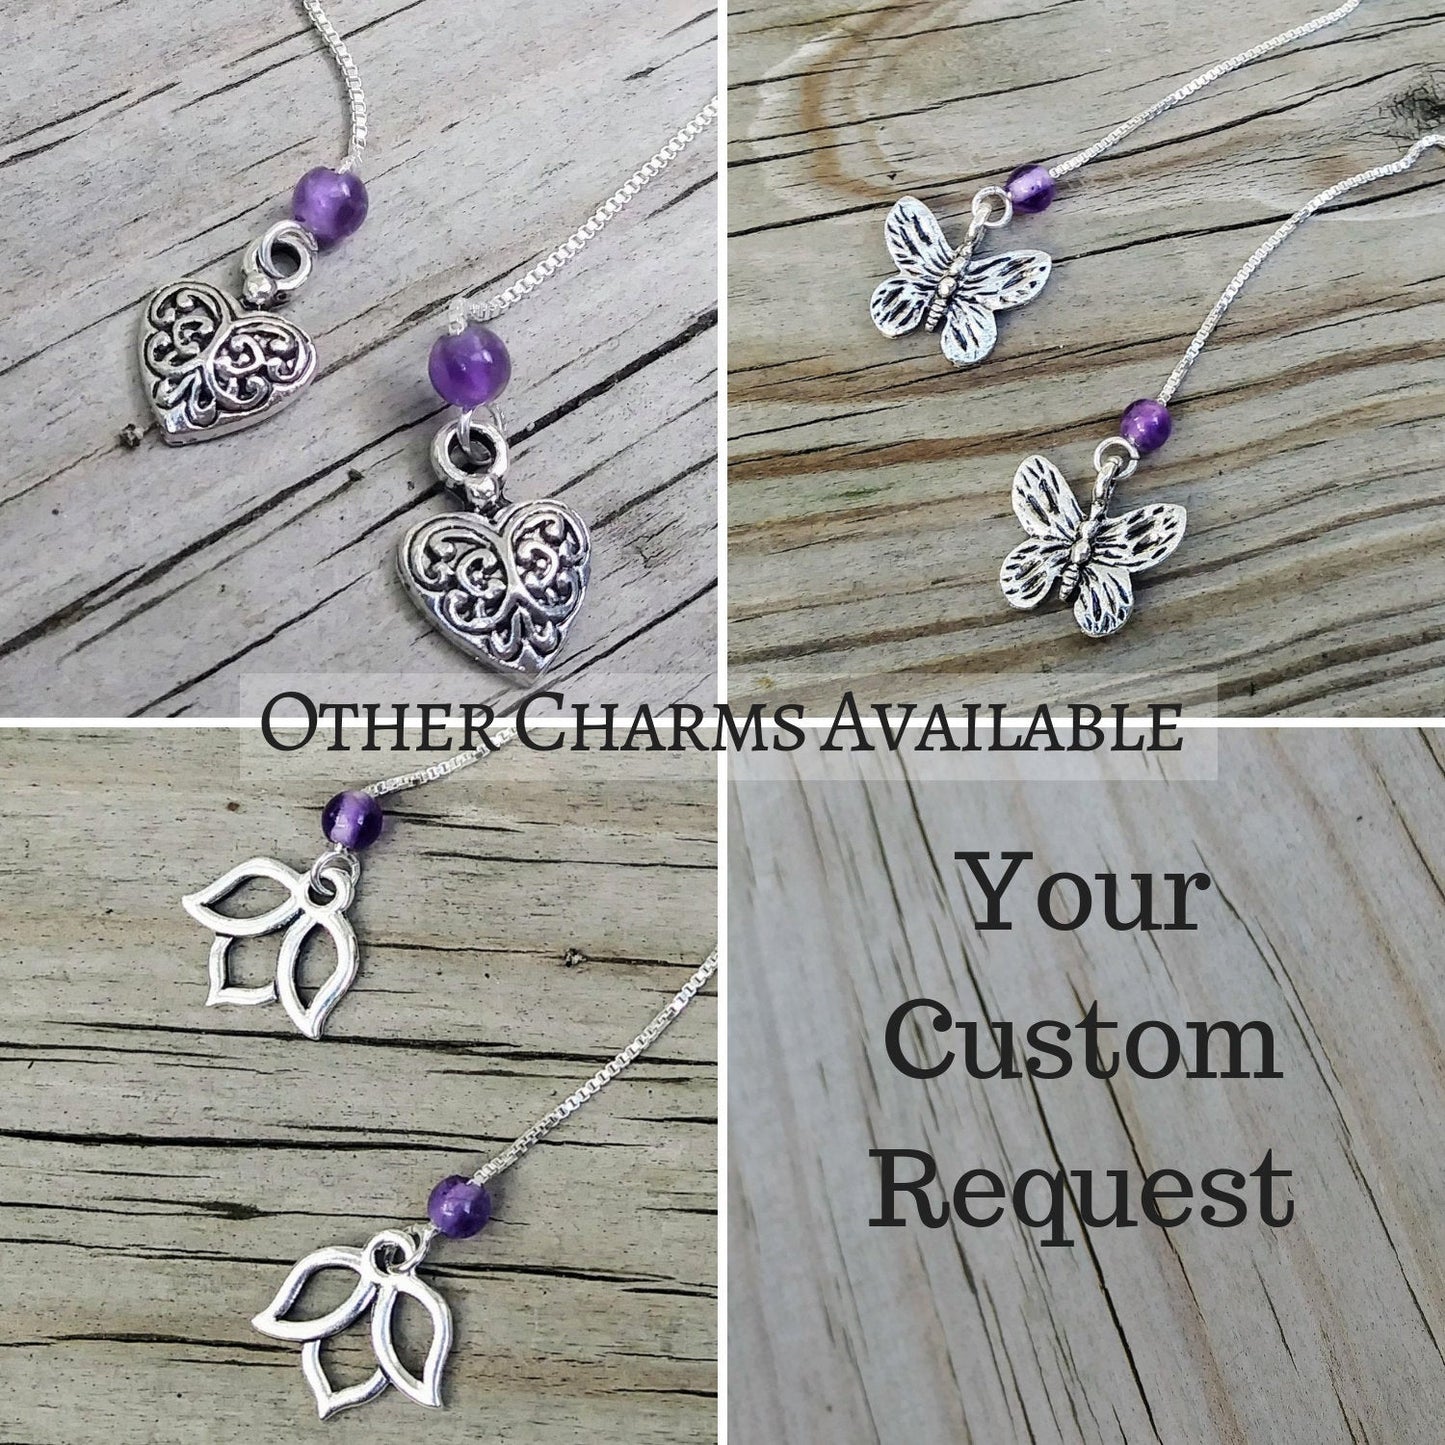 Lotus Charm Threader Earrings with Chakra Gemstone Set - 4 inch 0.925 Sterling Silver Threads